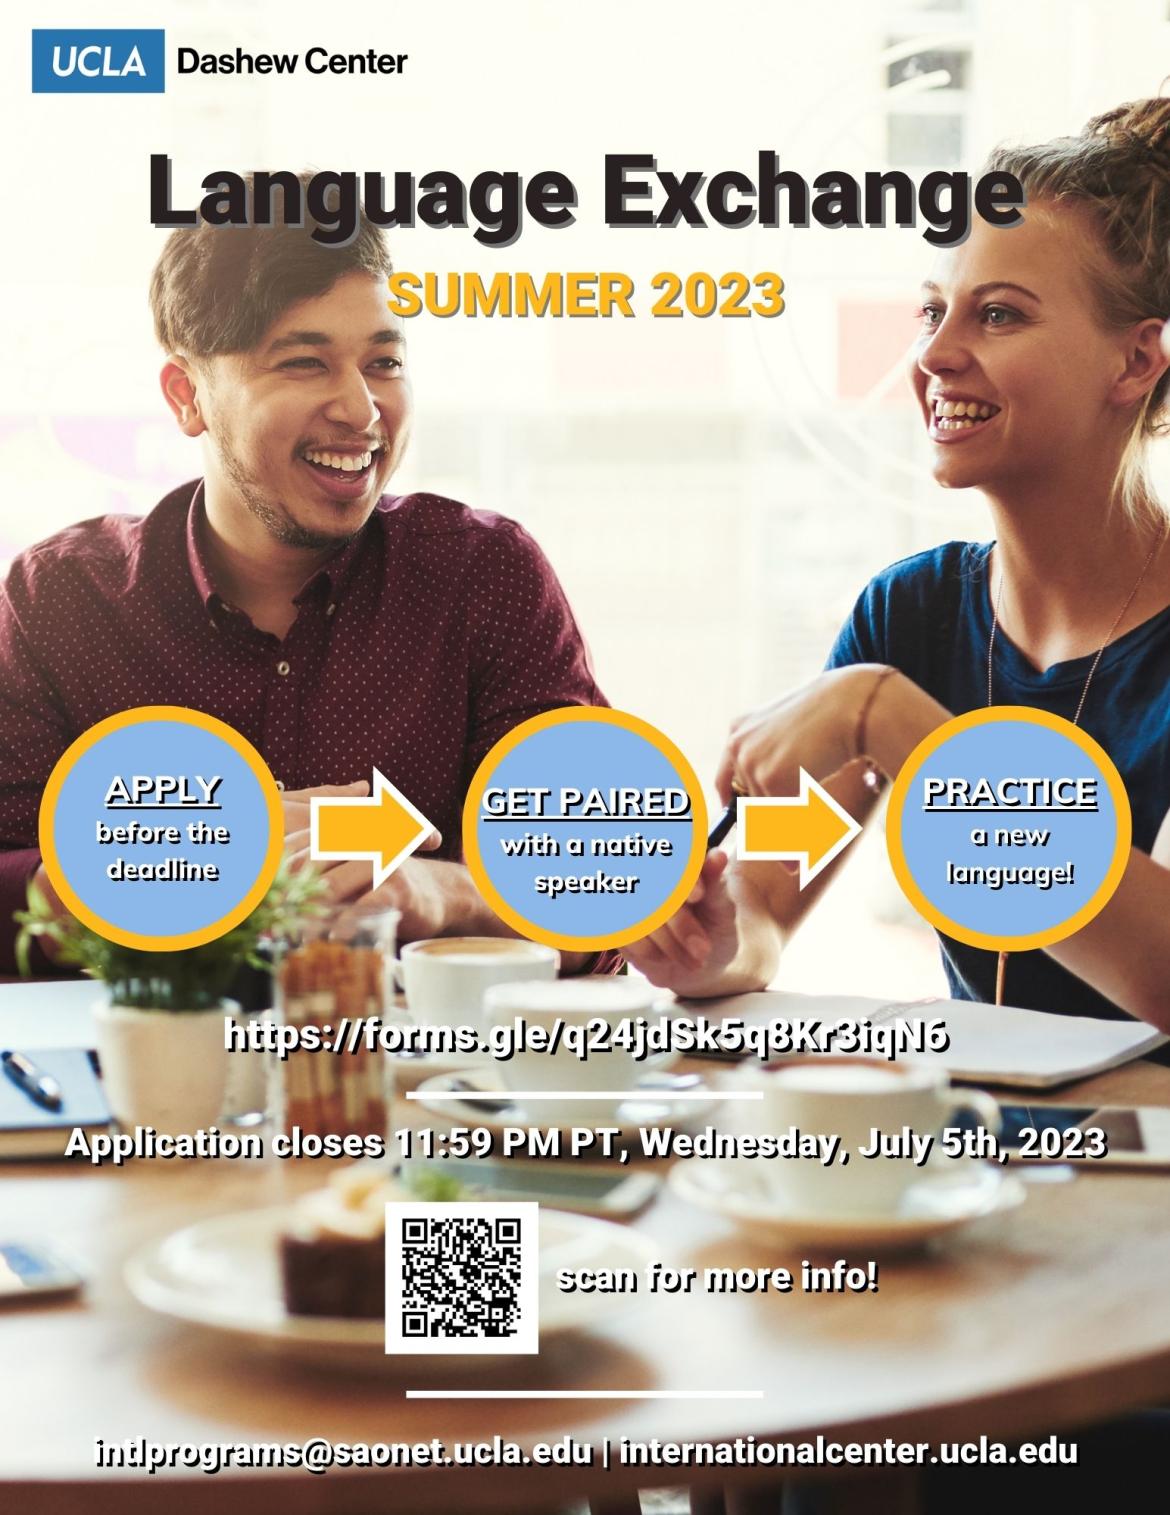 flyer for language exchange showing 2 people laughing over coffee